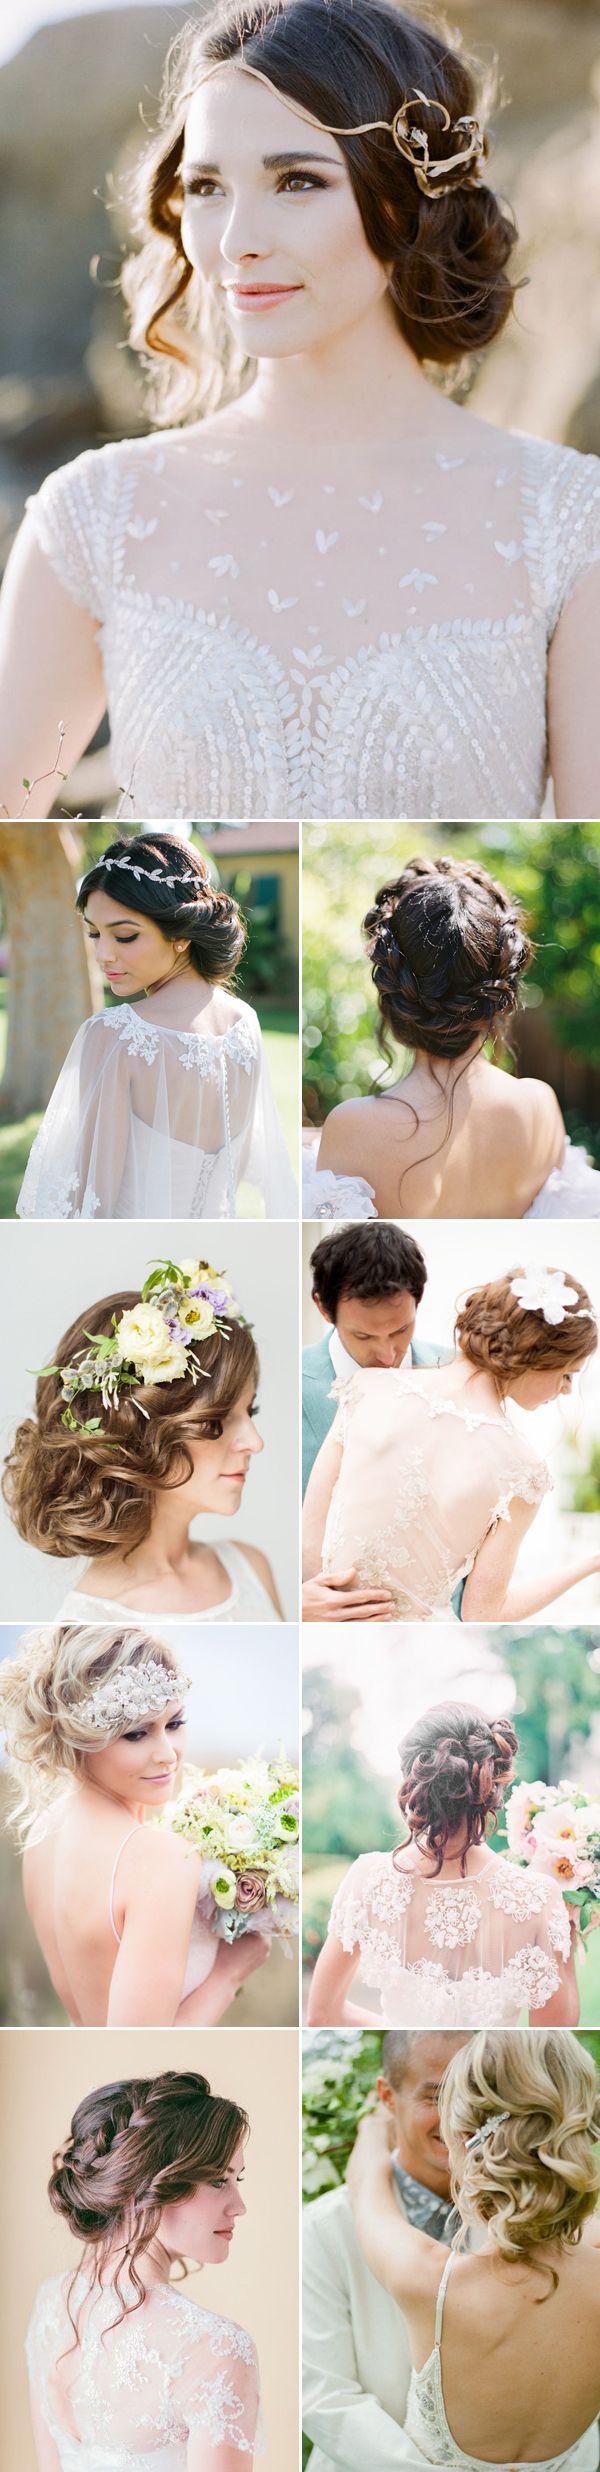 Wedding - Effortless Beauty! 20 Most Naturally Romantic Bridal Updos